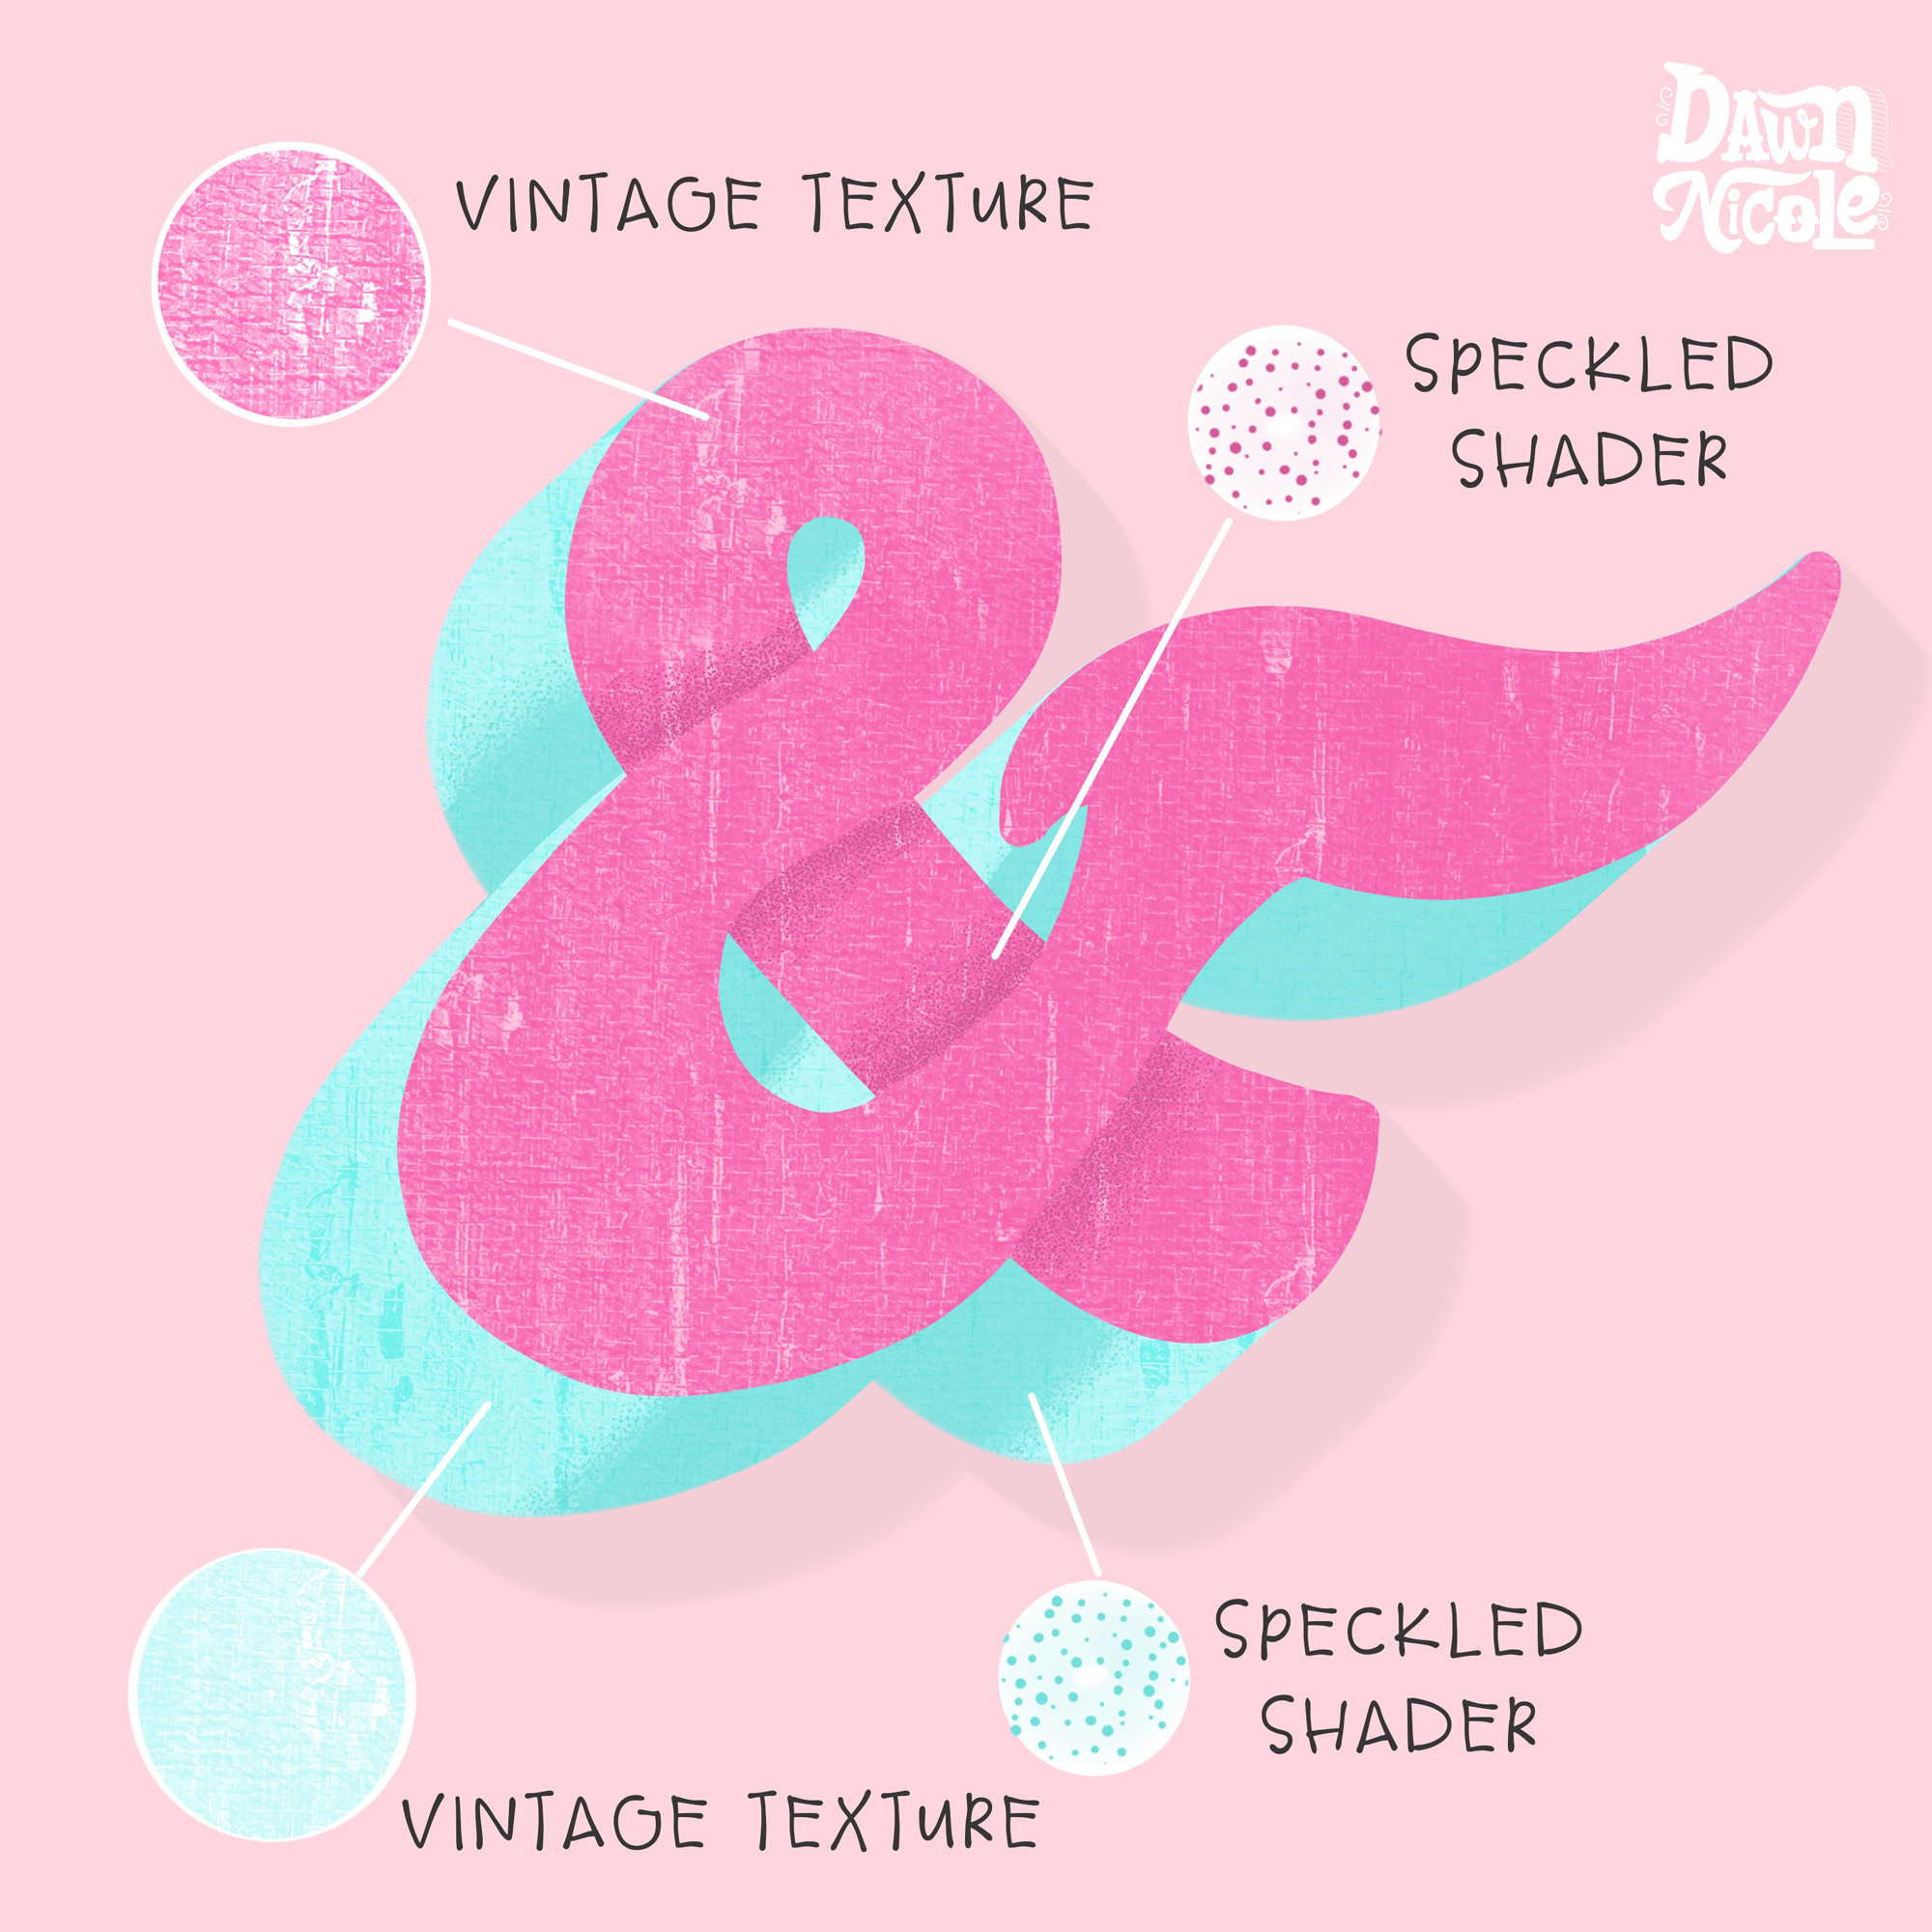 Textured Ampersand: Procreate Video Tutorial. Grab the free color palette and let's create this ampersand together step-by-step!